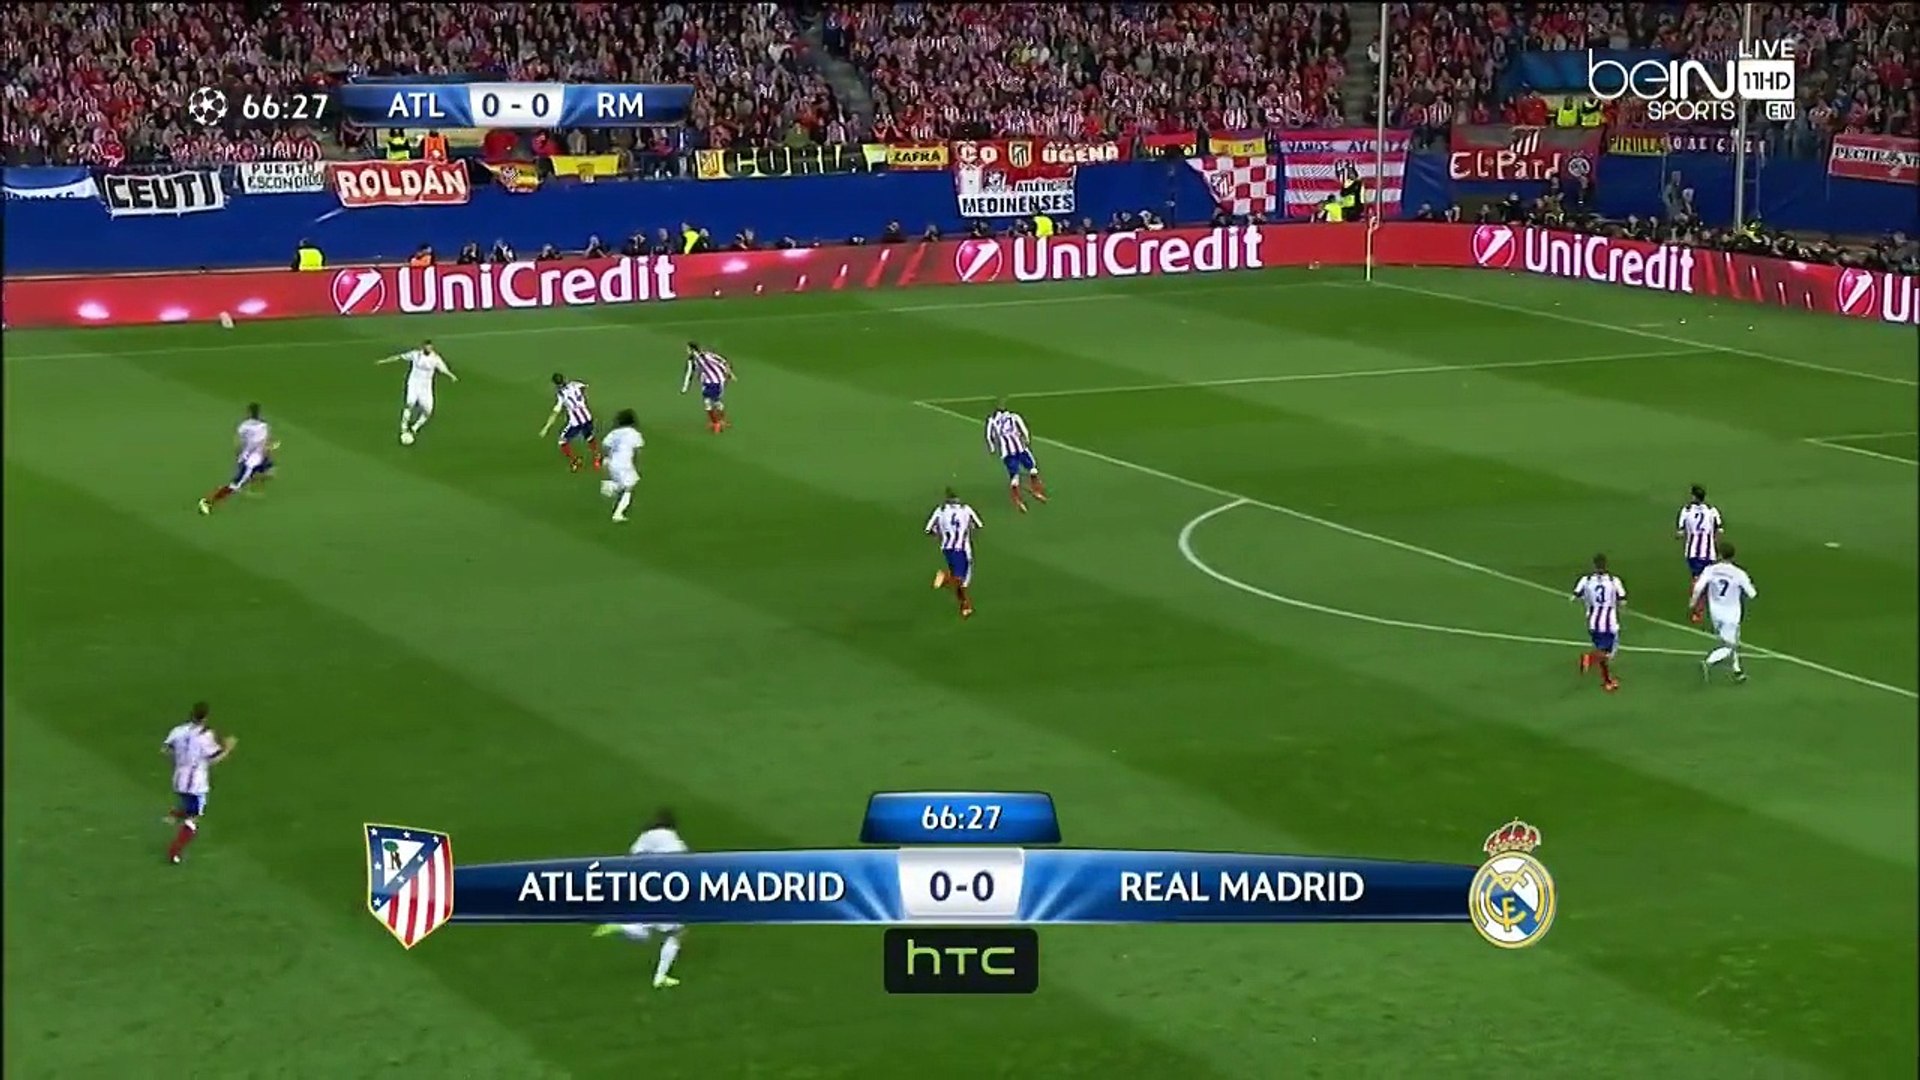 UCL 2014-15 1-4 Final - Atletico Madrid vs Real Madrid - 2nd Half  2015-04-14 - video Dailymotion